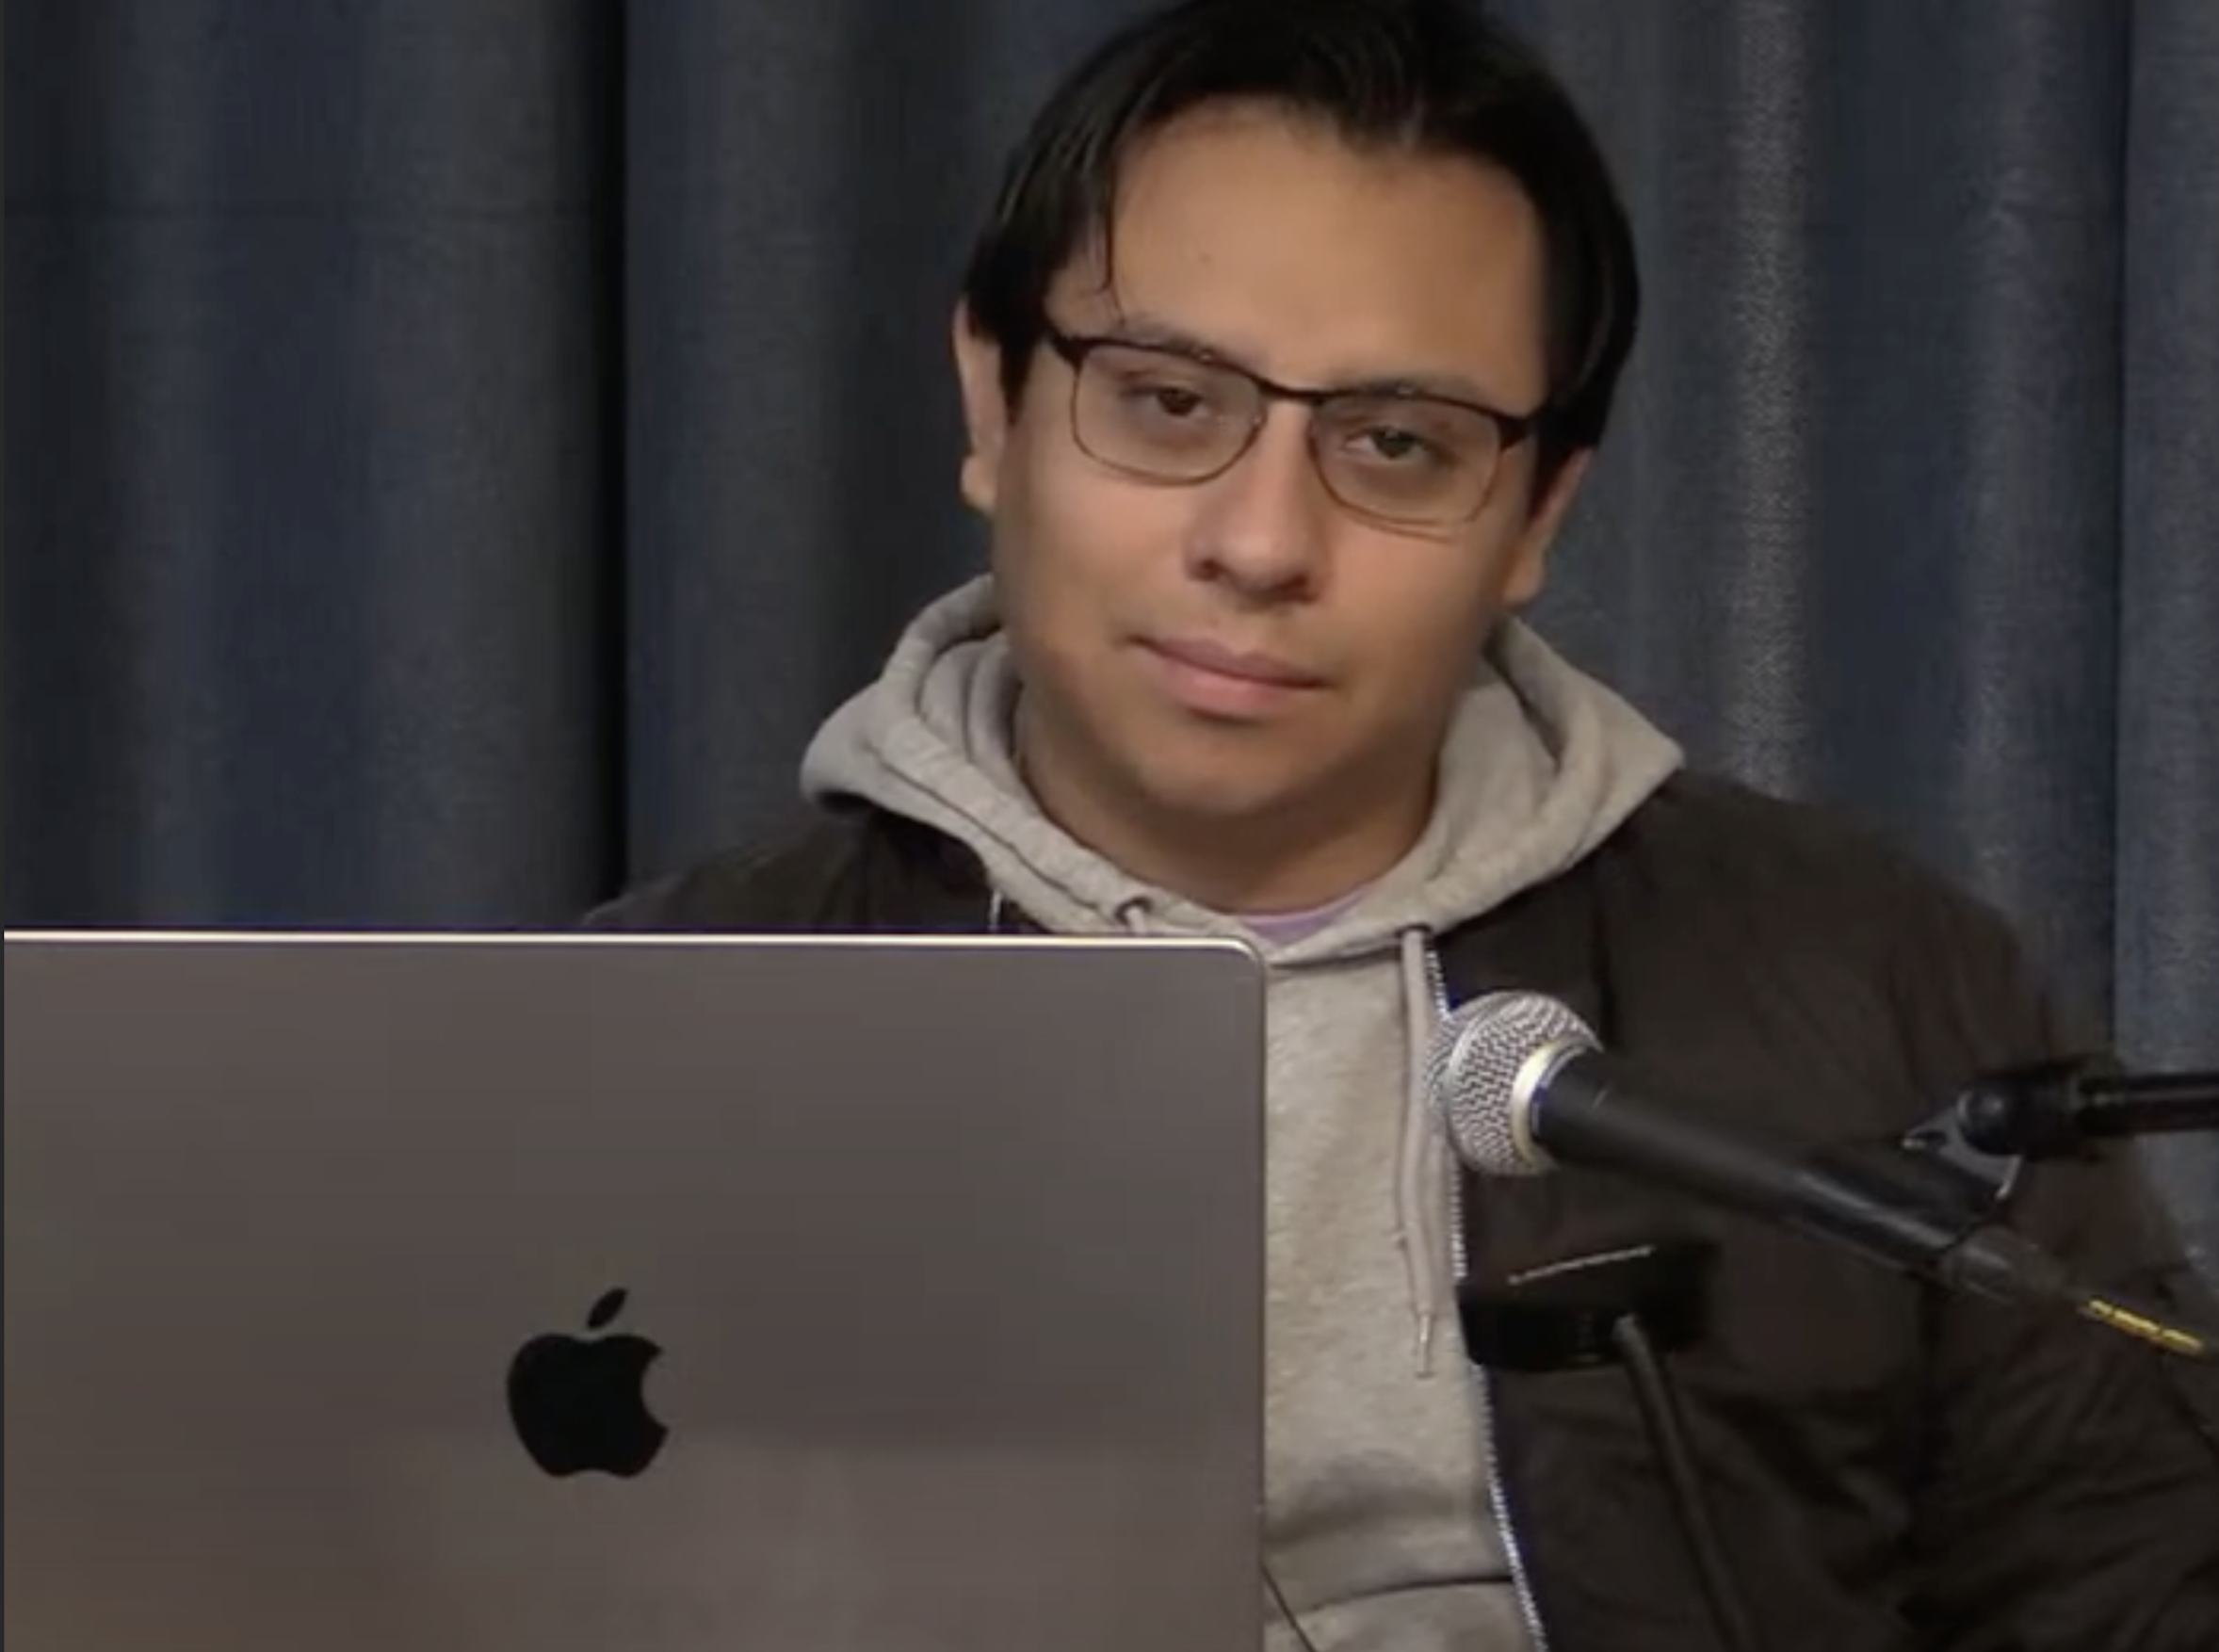 A person with short, dark hair and glasses is sitting in front of a dark curtain backdrop. They are wearing a gray hoodie under a dark jacket and looking slightly to the side with a neutral expression. In front of them is a laptop with an Apple logo. A microphone is positioned to the right of the laptop, suggesting that they might be speaking or preparing to speak.